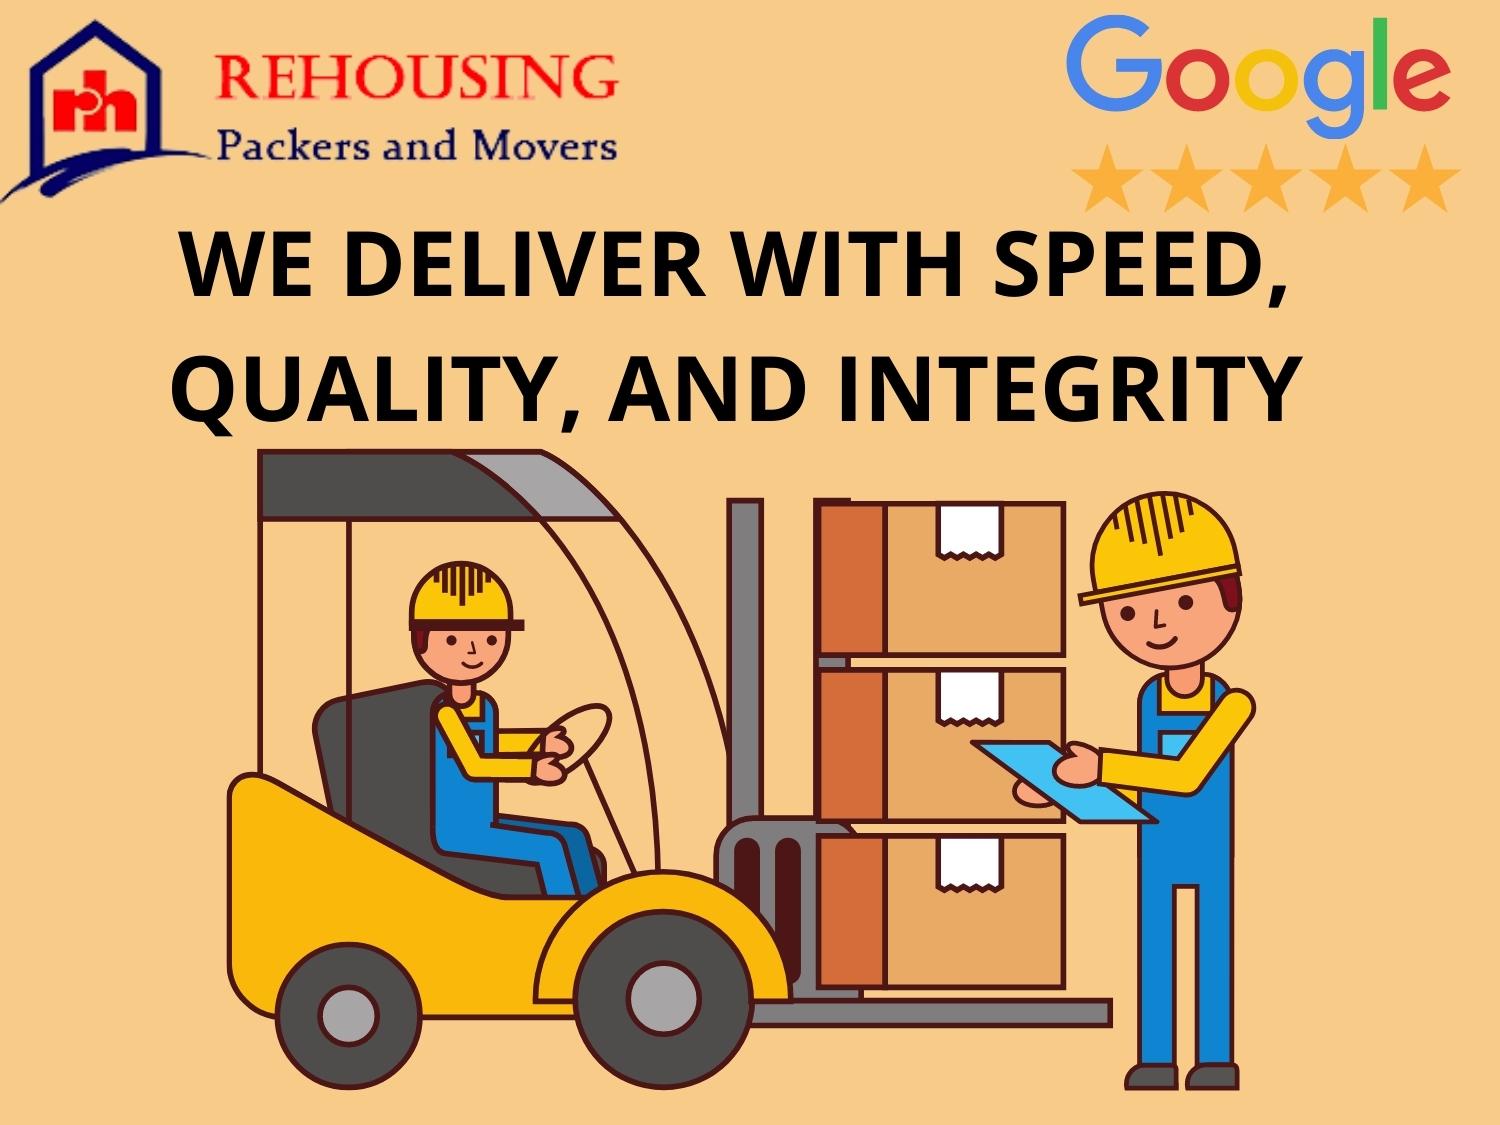 Courier services from Surat to Gurgaon is dependable and secure, but they do not meet your desire for immediate delivery